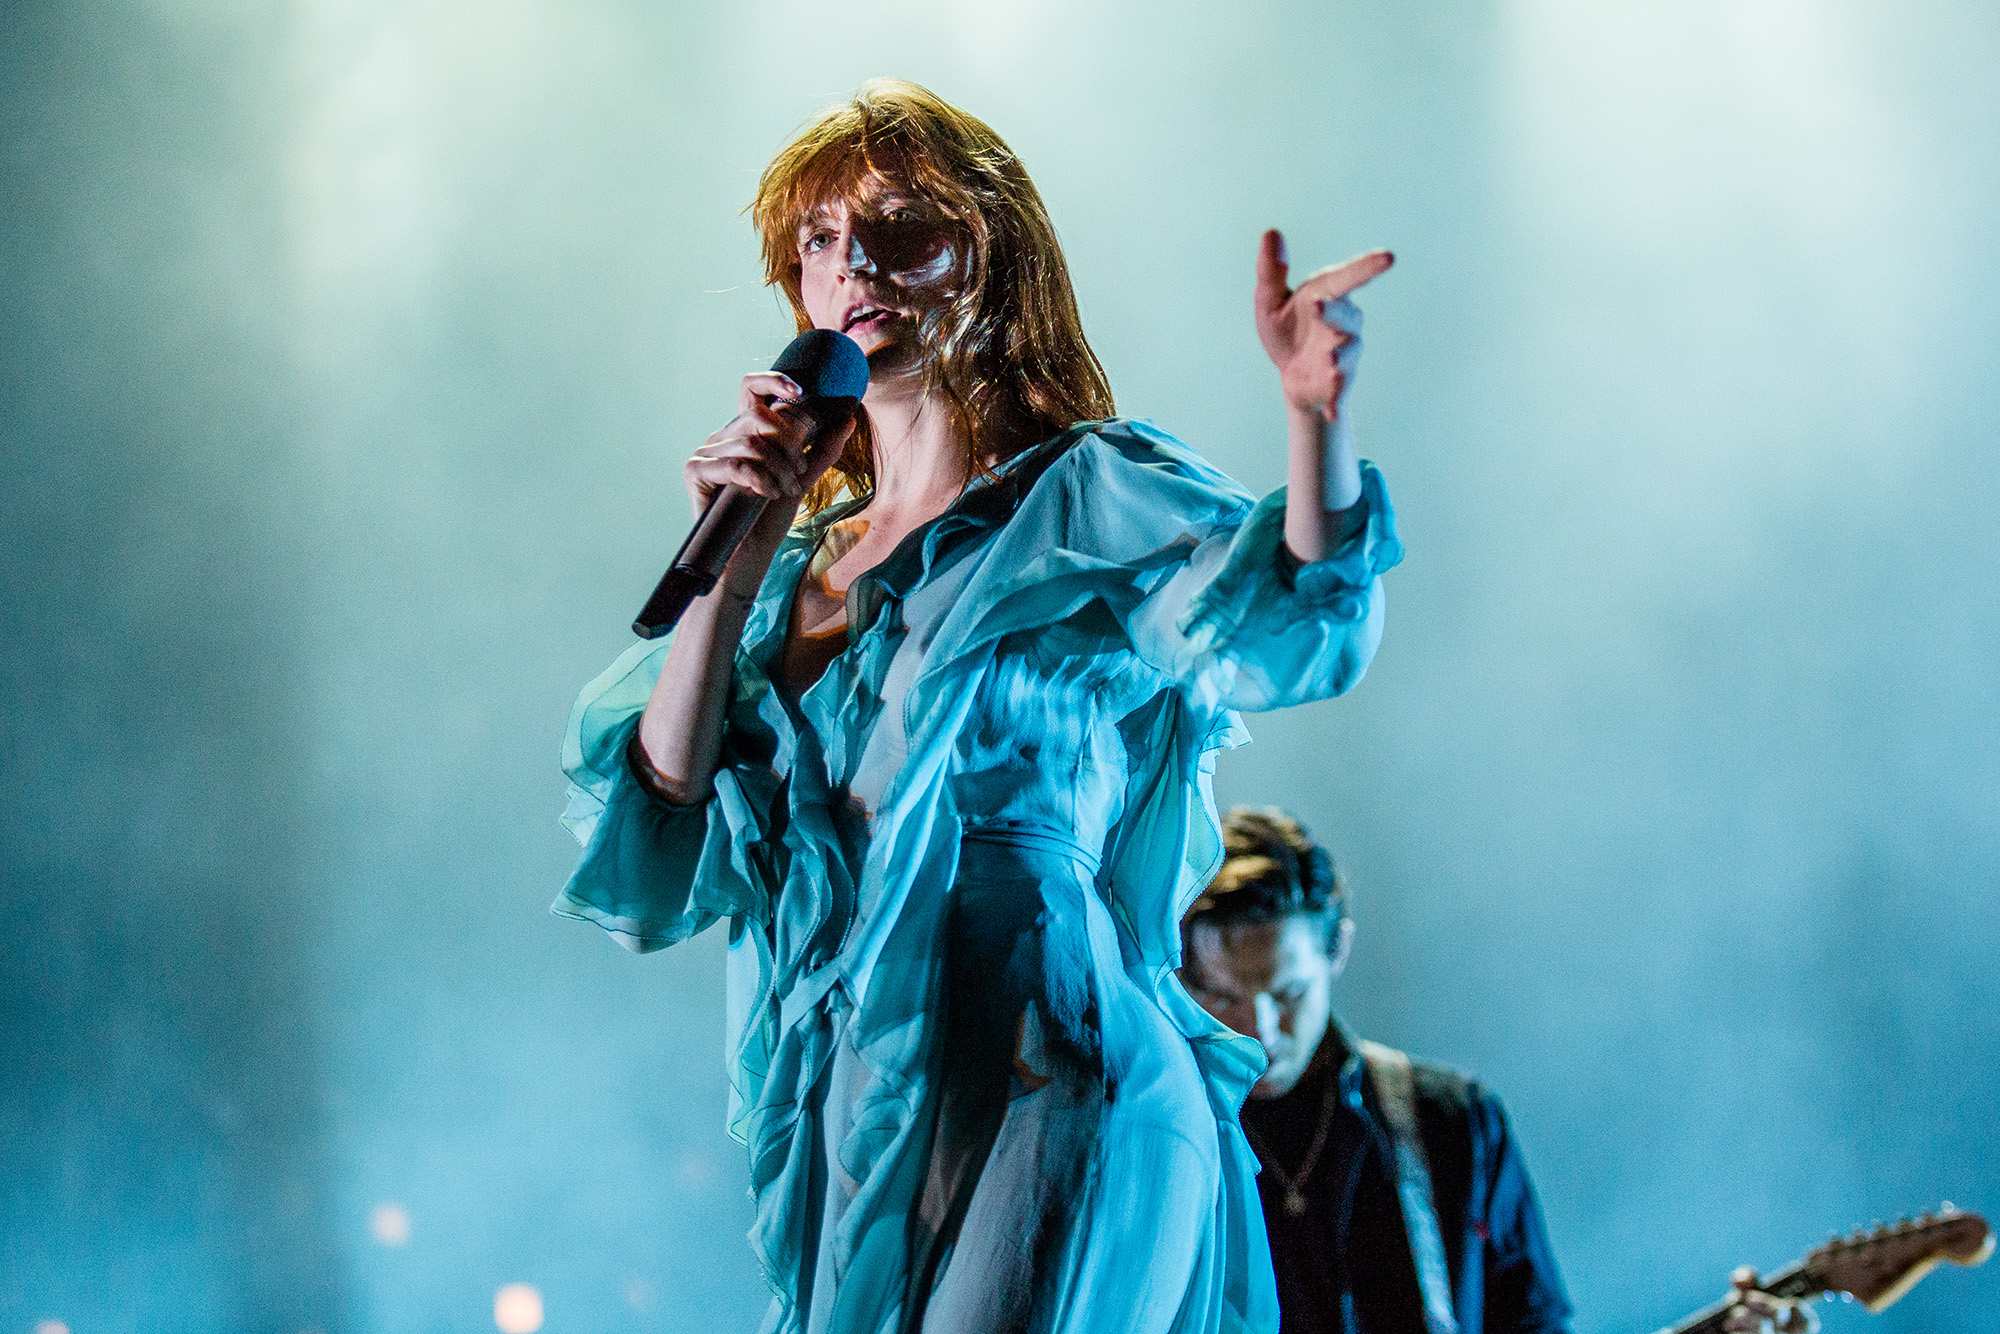 GULF SHORES, AL - MAY 22:  Florence Welch of Florence + The Machine performs at the Hangout Music Festival on May 22, 2016 in Gulf Shores, Alabama.  (Photo by Josh Brasted/WireImage) (Josh Brasted&mdash;WireImage)